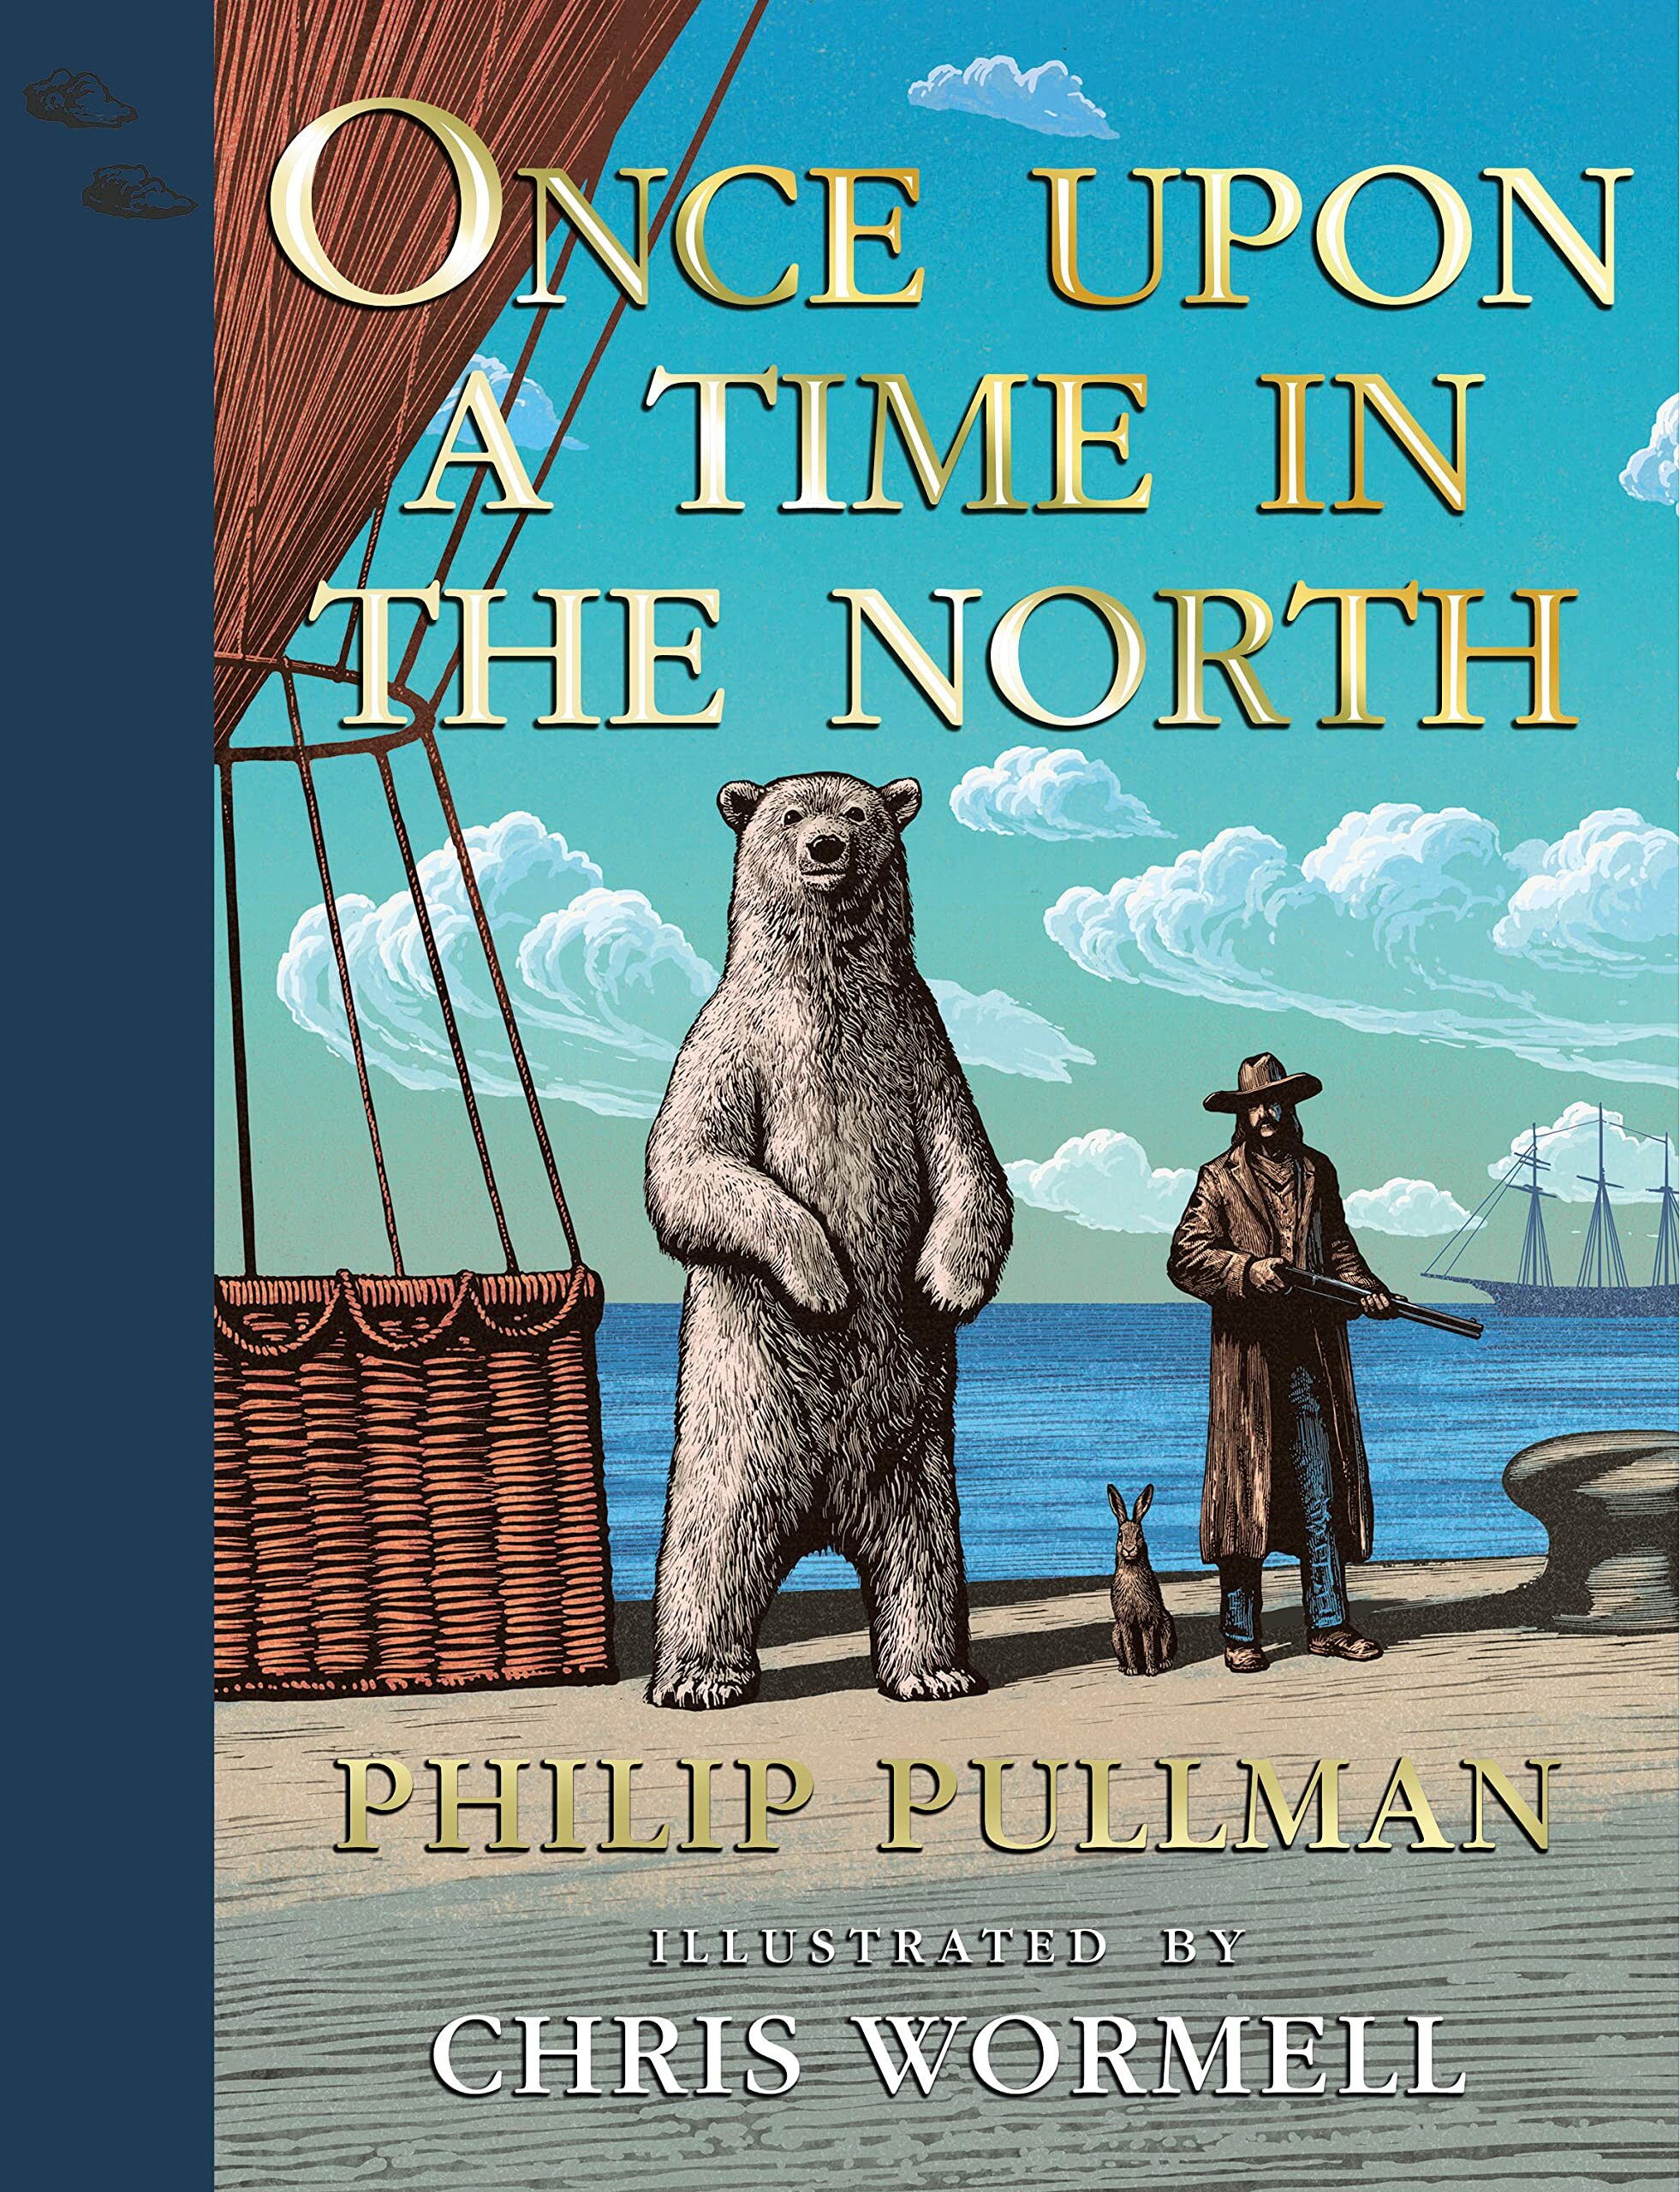 His Dark Materials: Once Upon A Time In The North